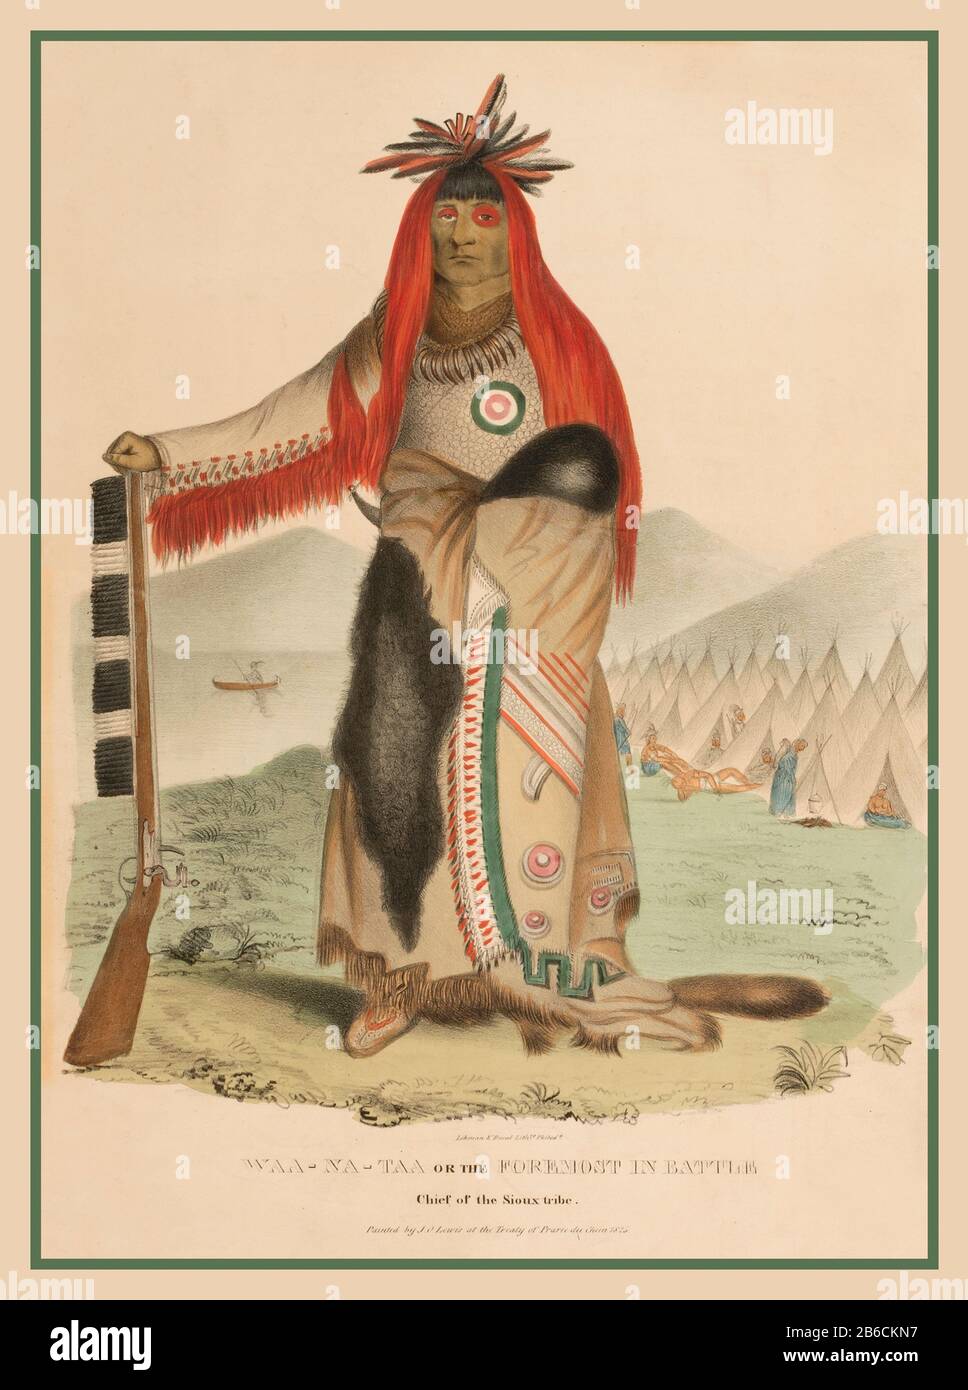 Lithograph vintage 1850s di Waa-na-taa, Most in Battle, Capo del Sioux Tribe dell'artista James otto Lewis, Philadelphia, PA Sitter Waa-na-taa Chief Sioux Tribe Native American Graphic Art Print Illustration Color Lithograph Graphic Ethnic IndianSioux Tribe Foto Stock